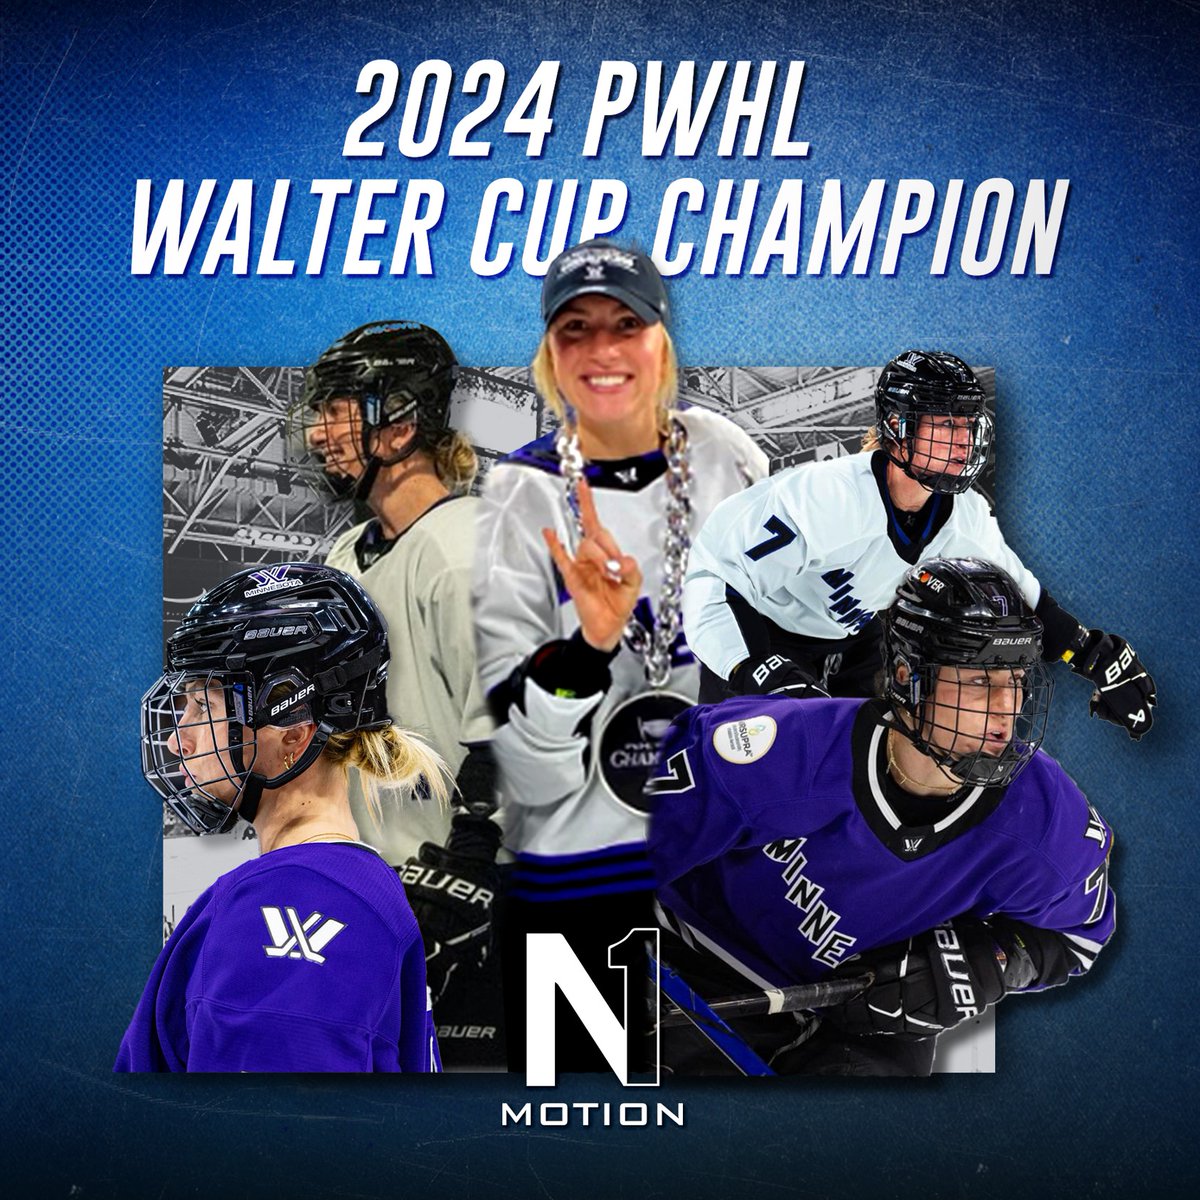 💥Player Spotlight💥

Congrats to N1 Athlete Claire Butorac on winning the 2024 PWHL Walter Cup Championship! 🏒
.
.
.
.
#BeUnstoppable #N1Motion #EmbraceTheJourney #fitnessmotivation #nevergiveup #believeinyourself #womenshockey